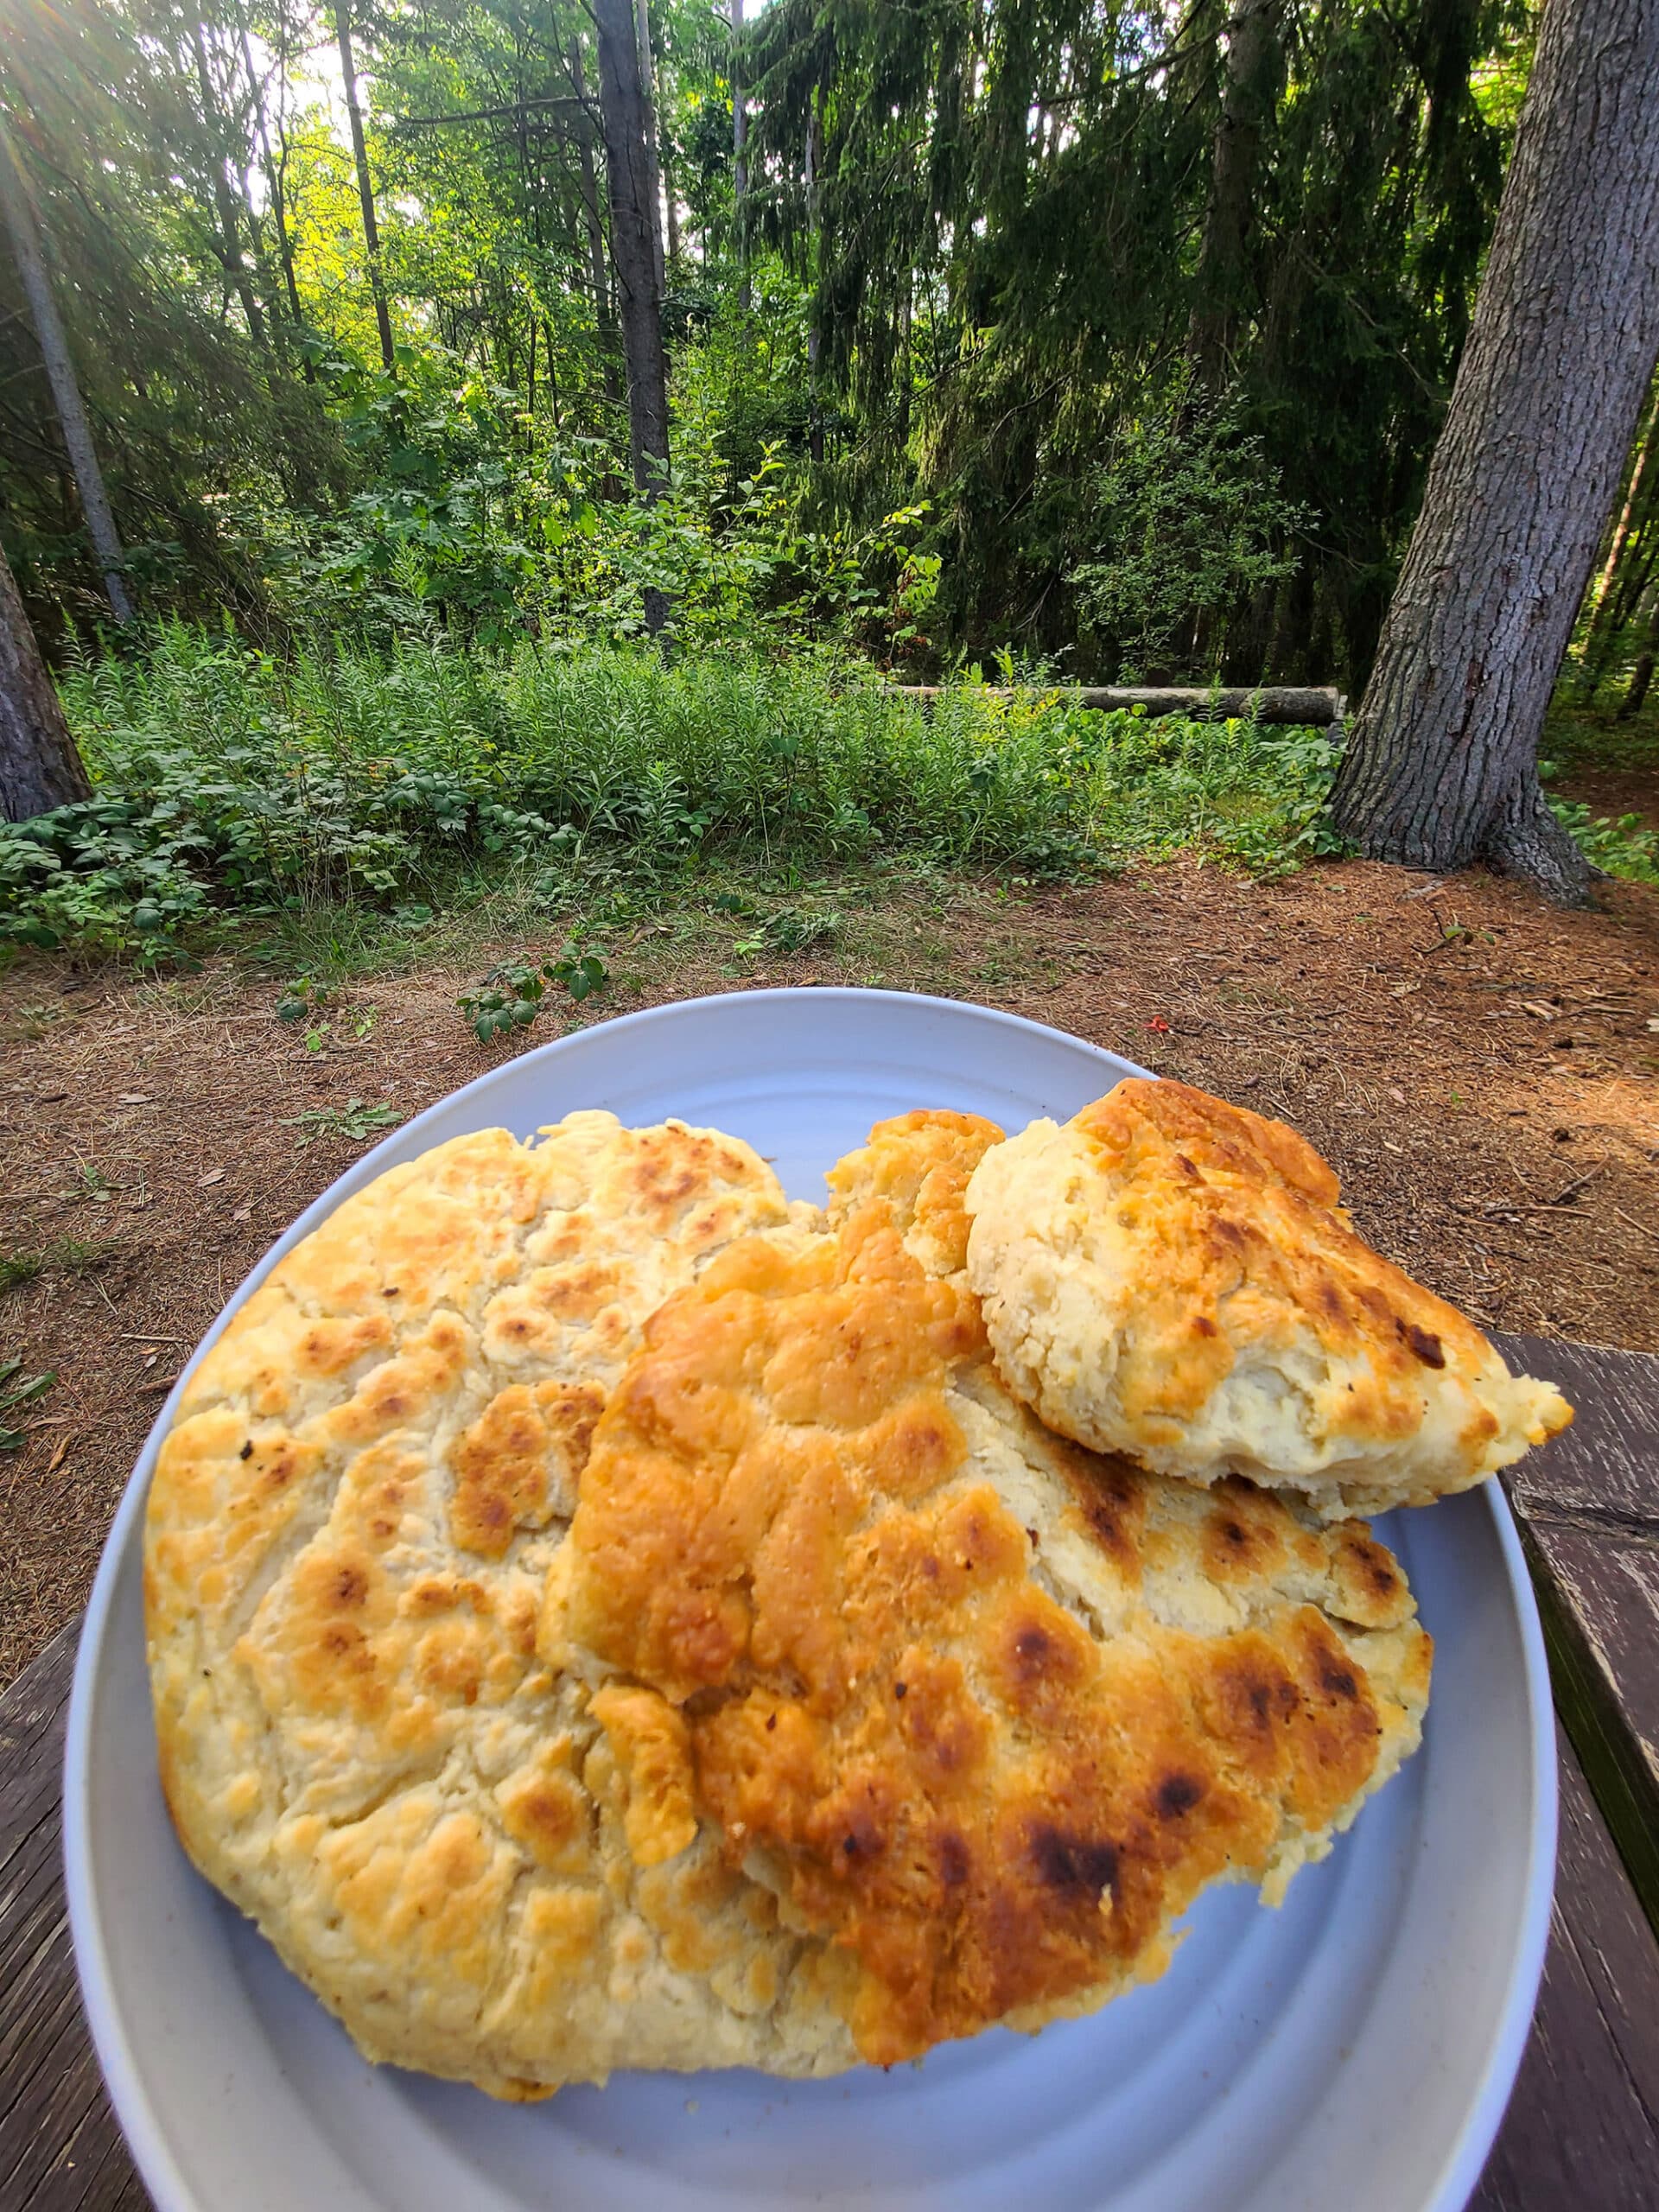 3 pieces of bannock bread on a plate, with a campsite in the background.